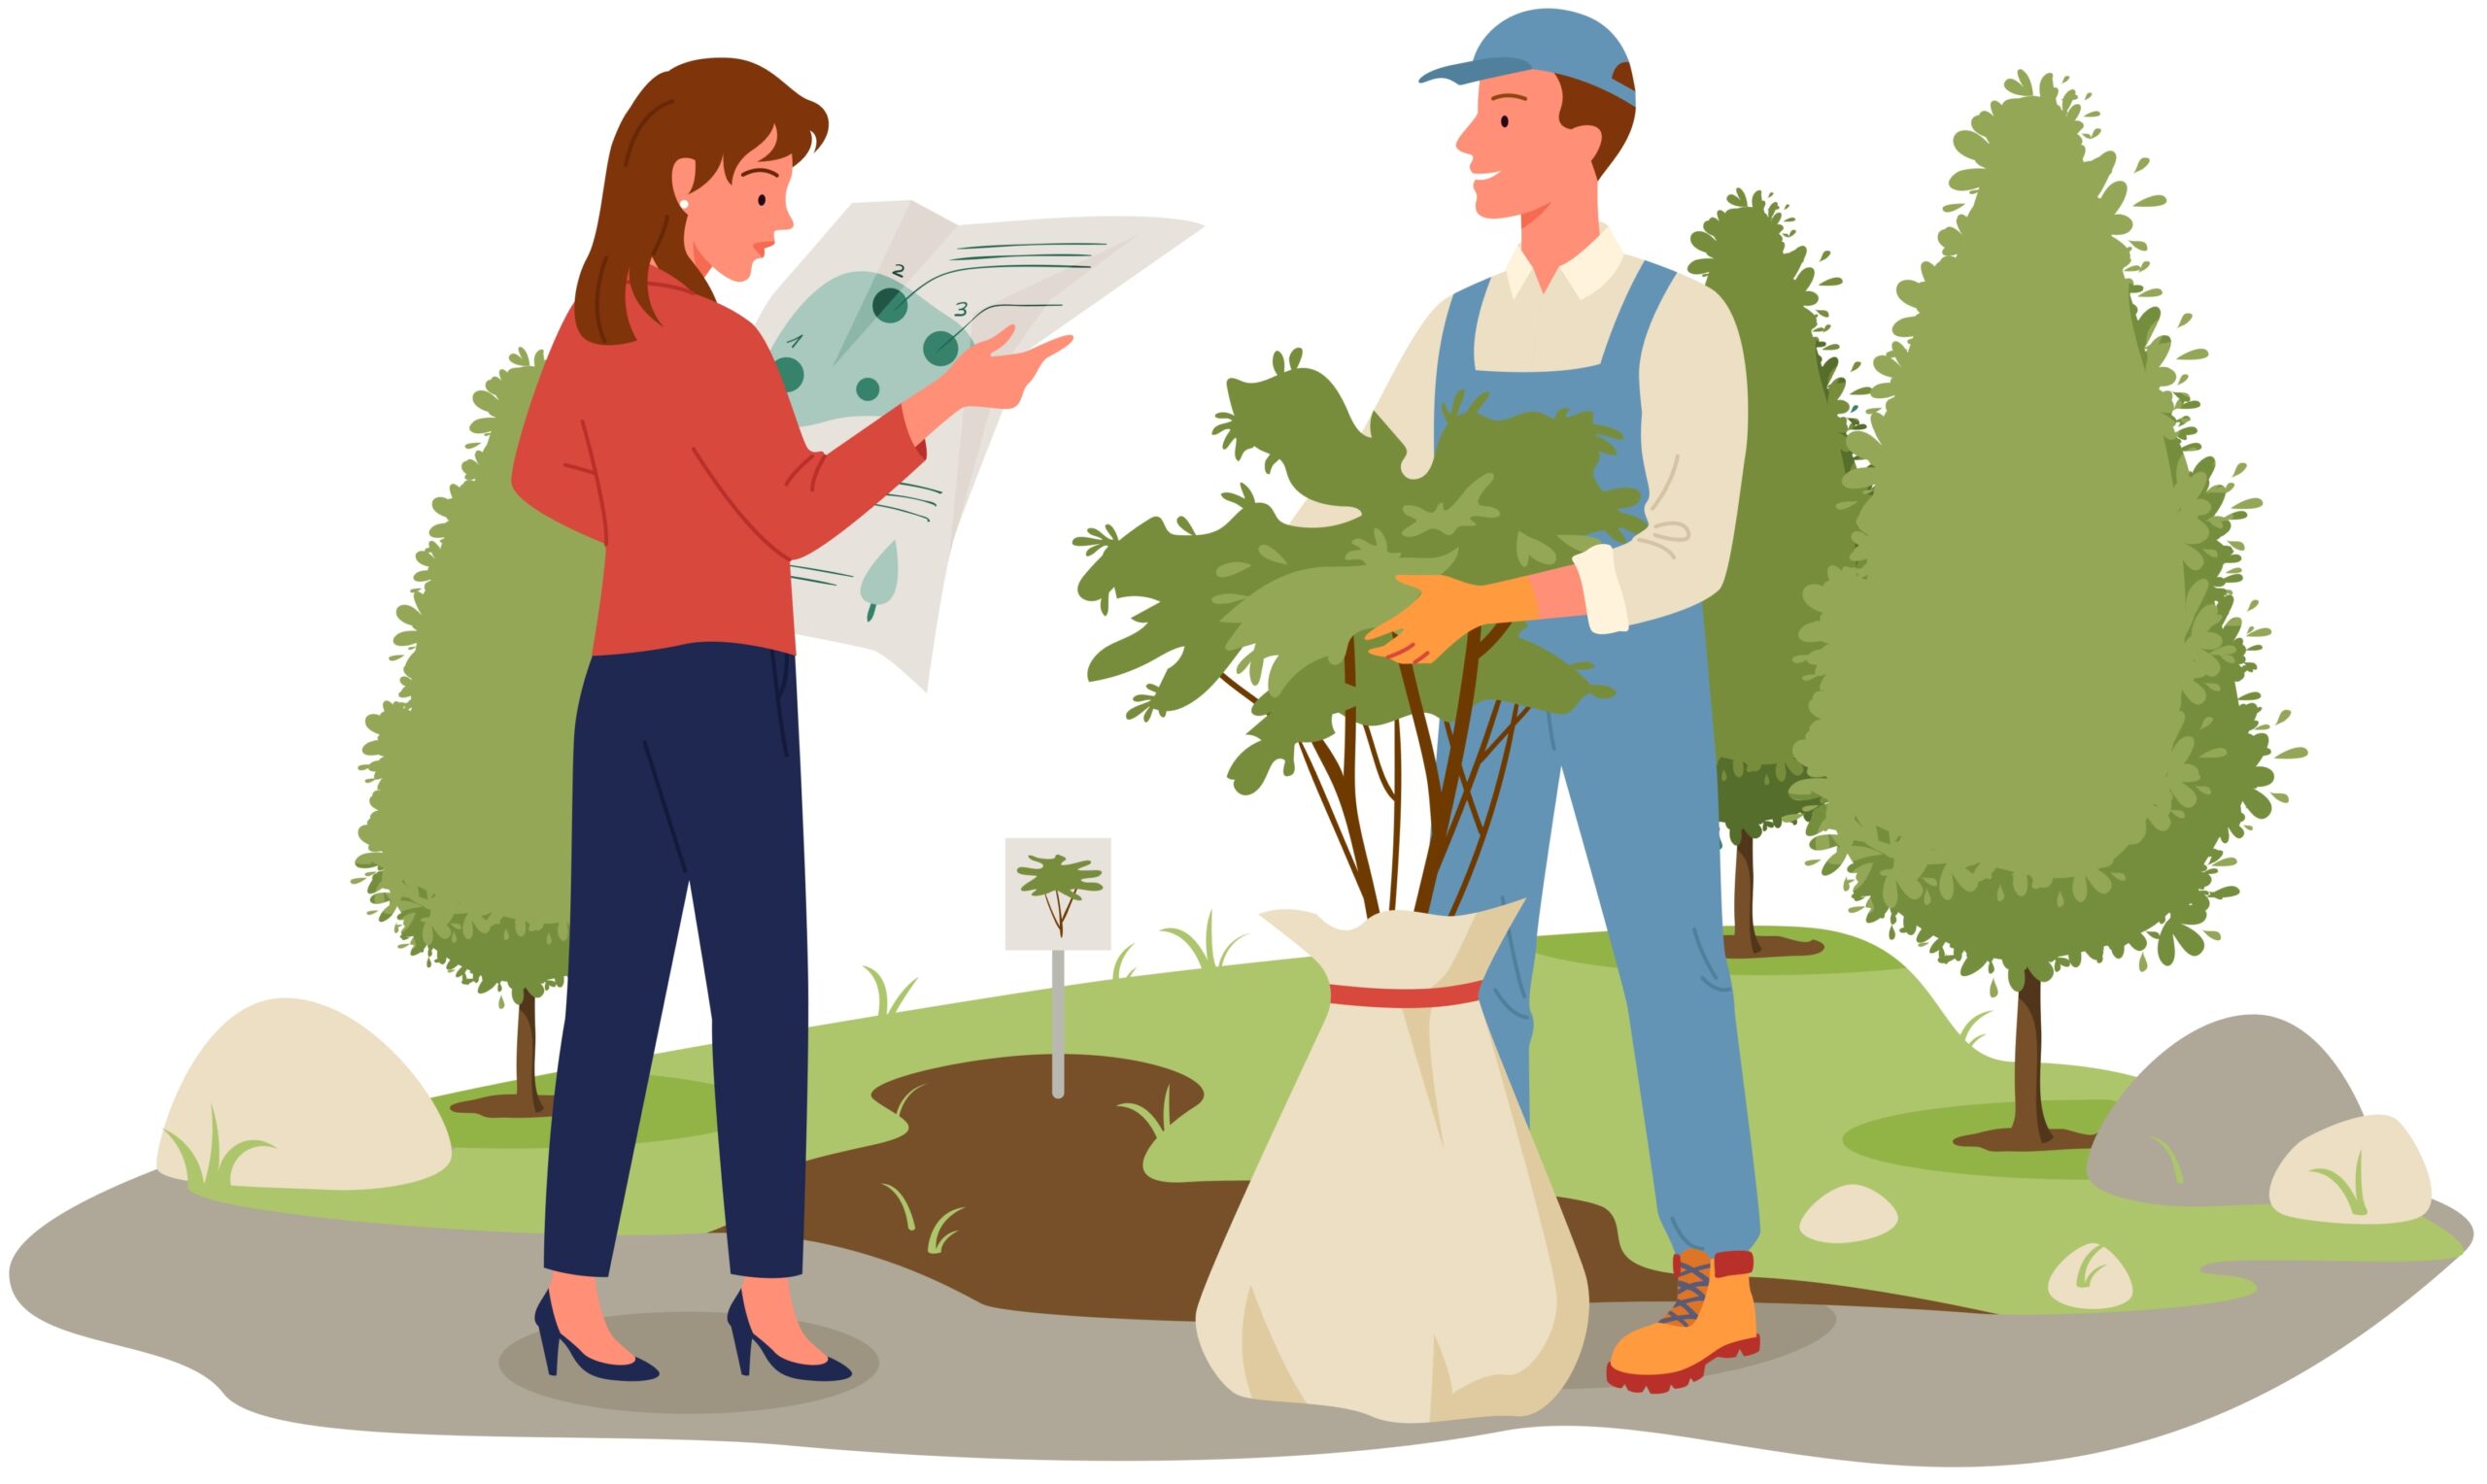 People grow trees in forest, park or garden agriculture work, gardener holding sapling